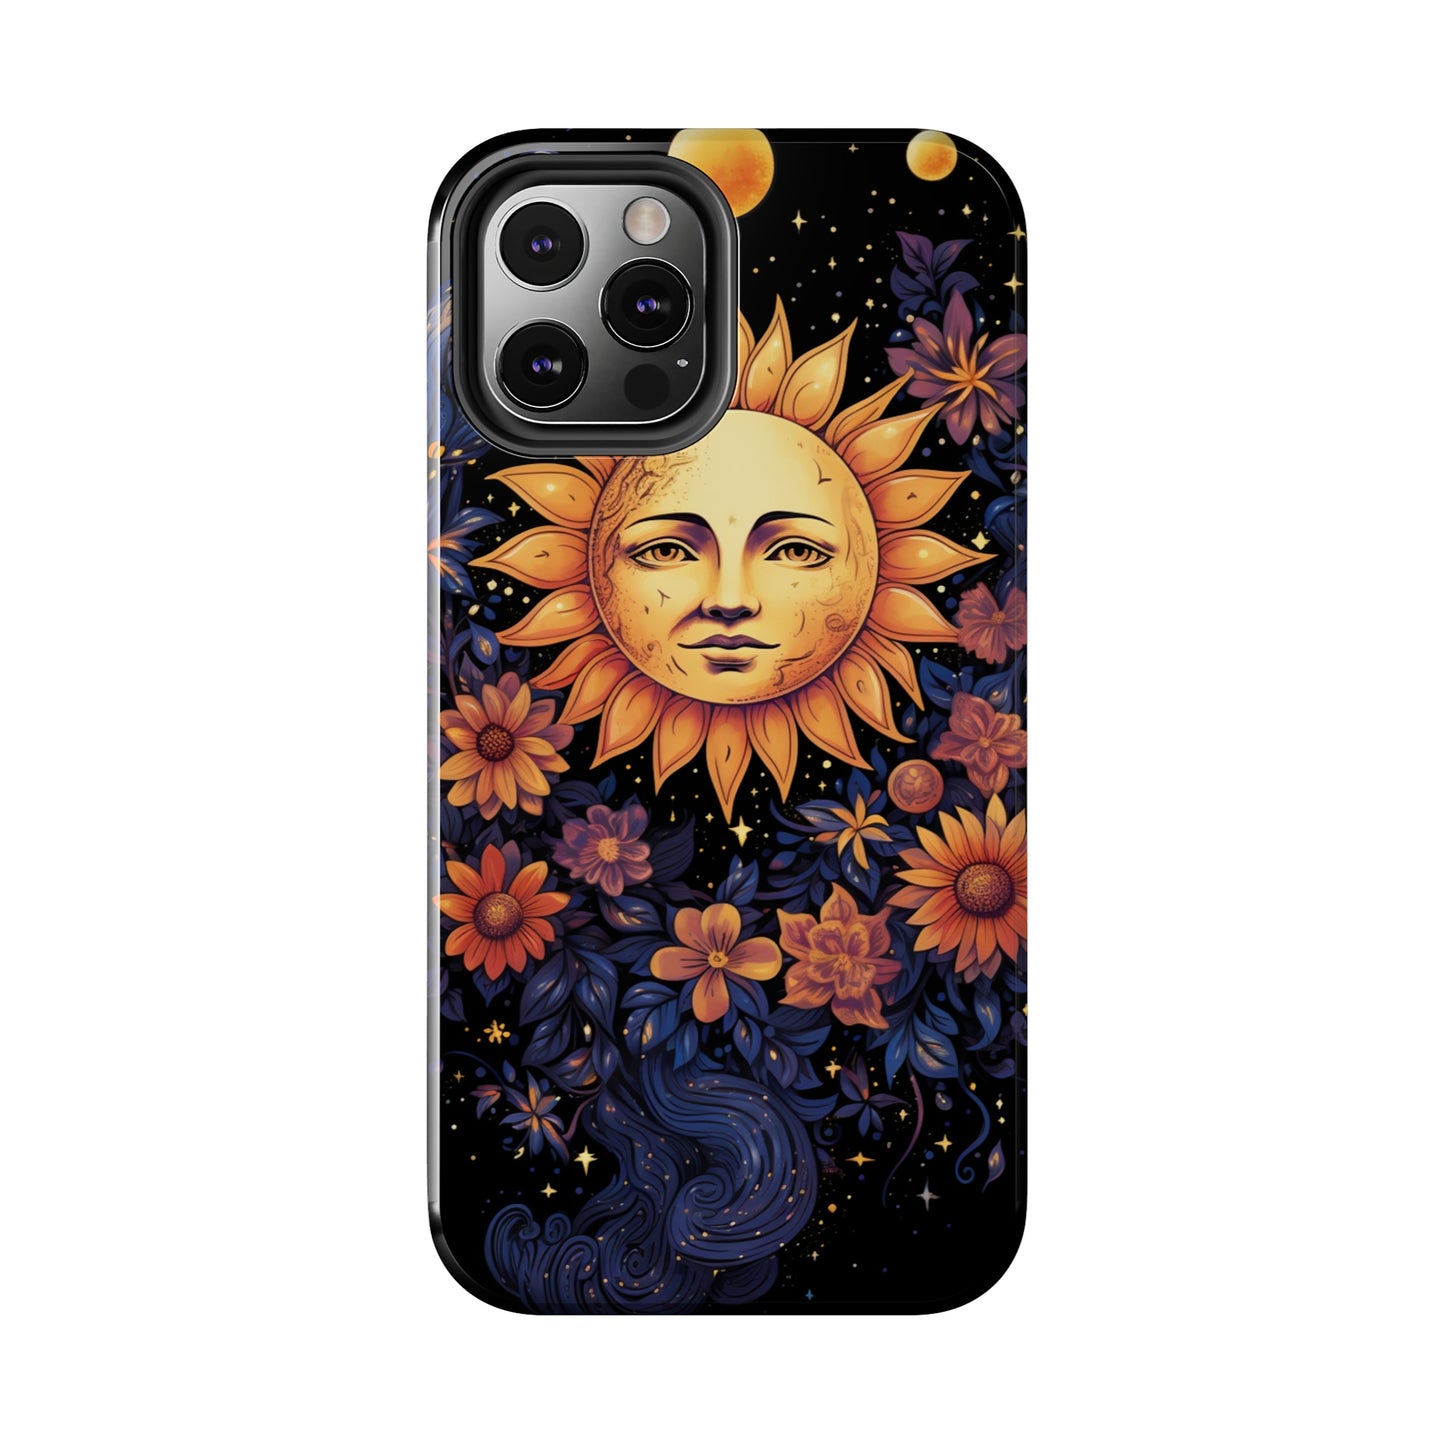 Protective iPhone 11 and 14 case with sun, moon, and flower designs